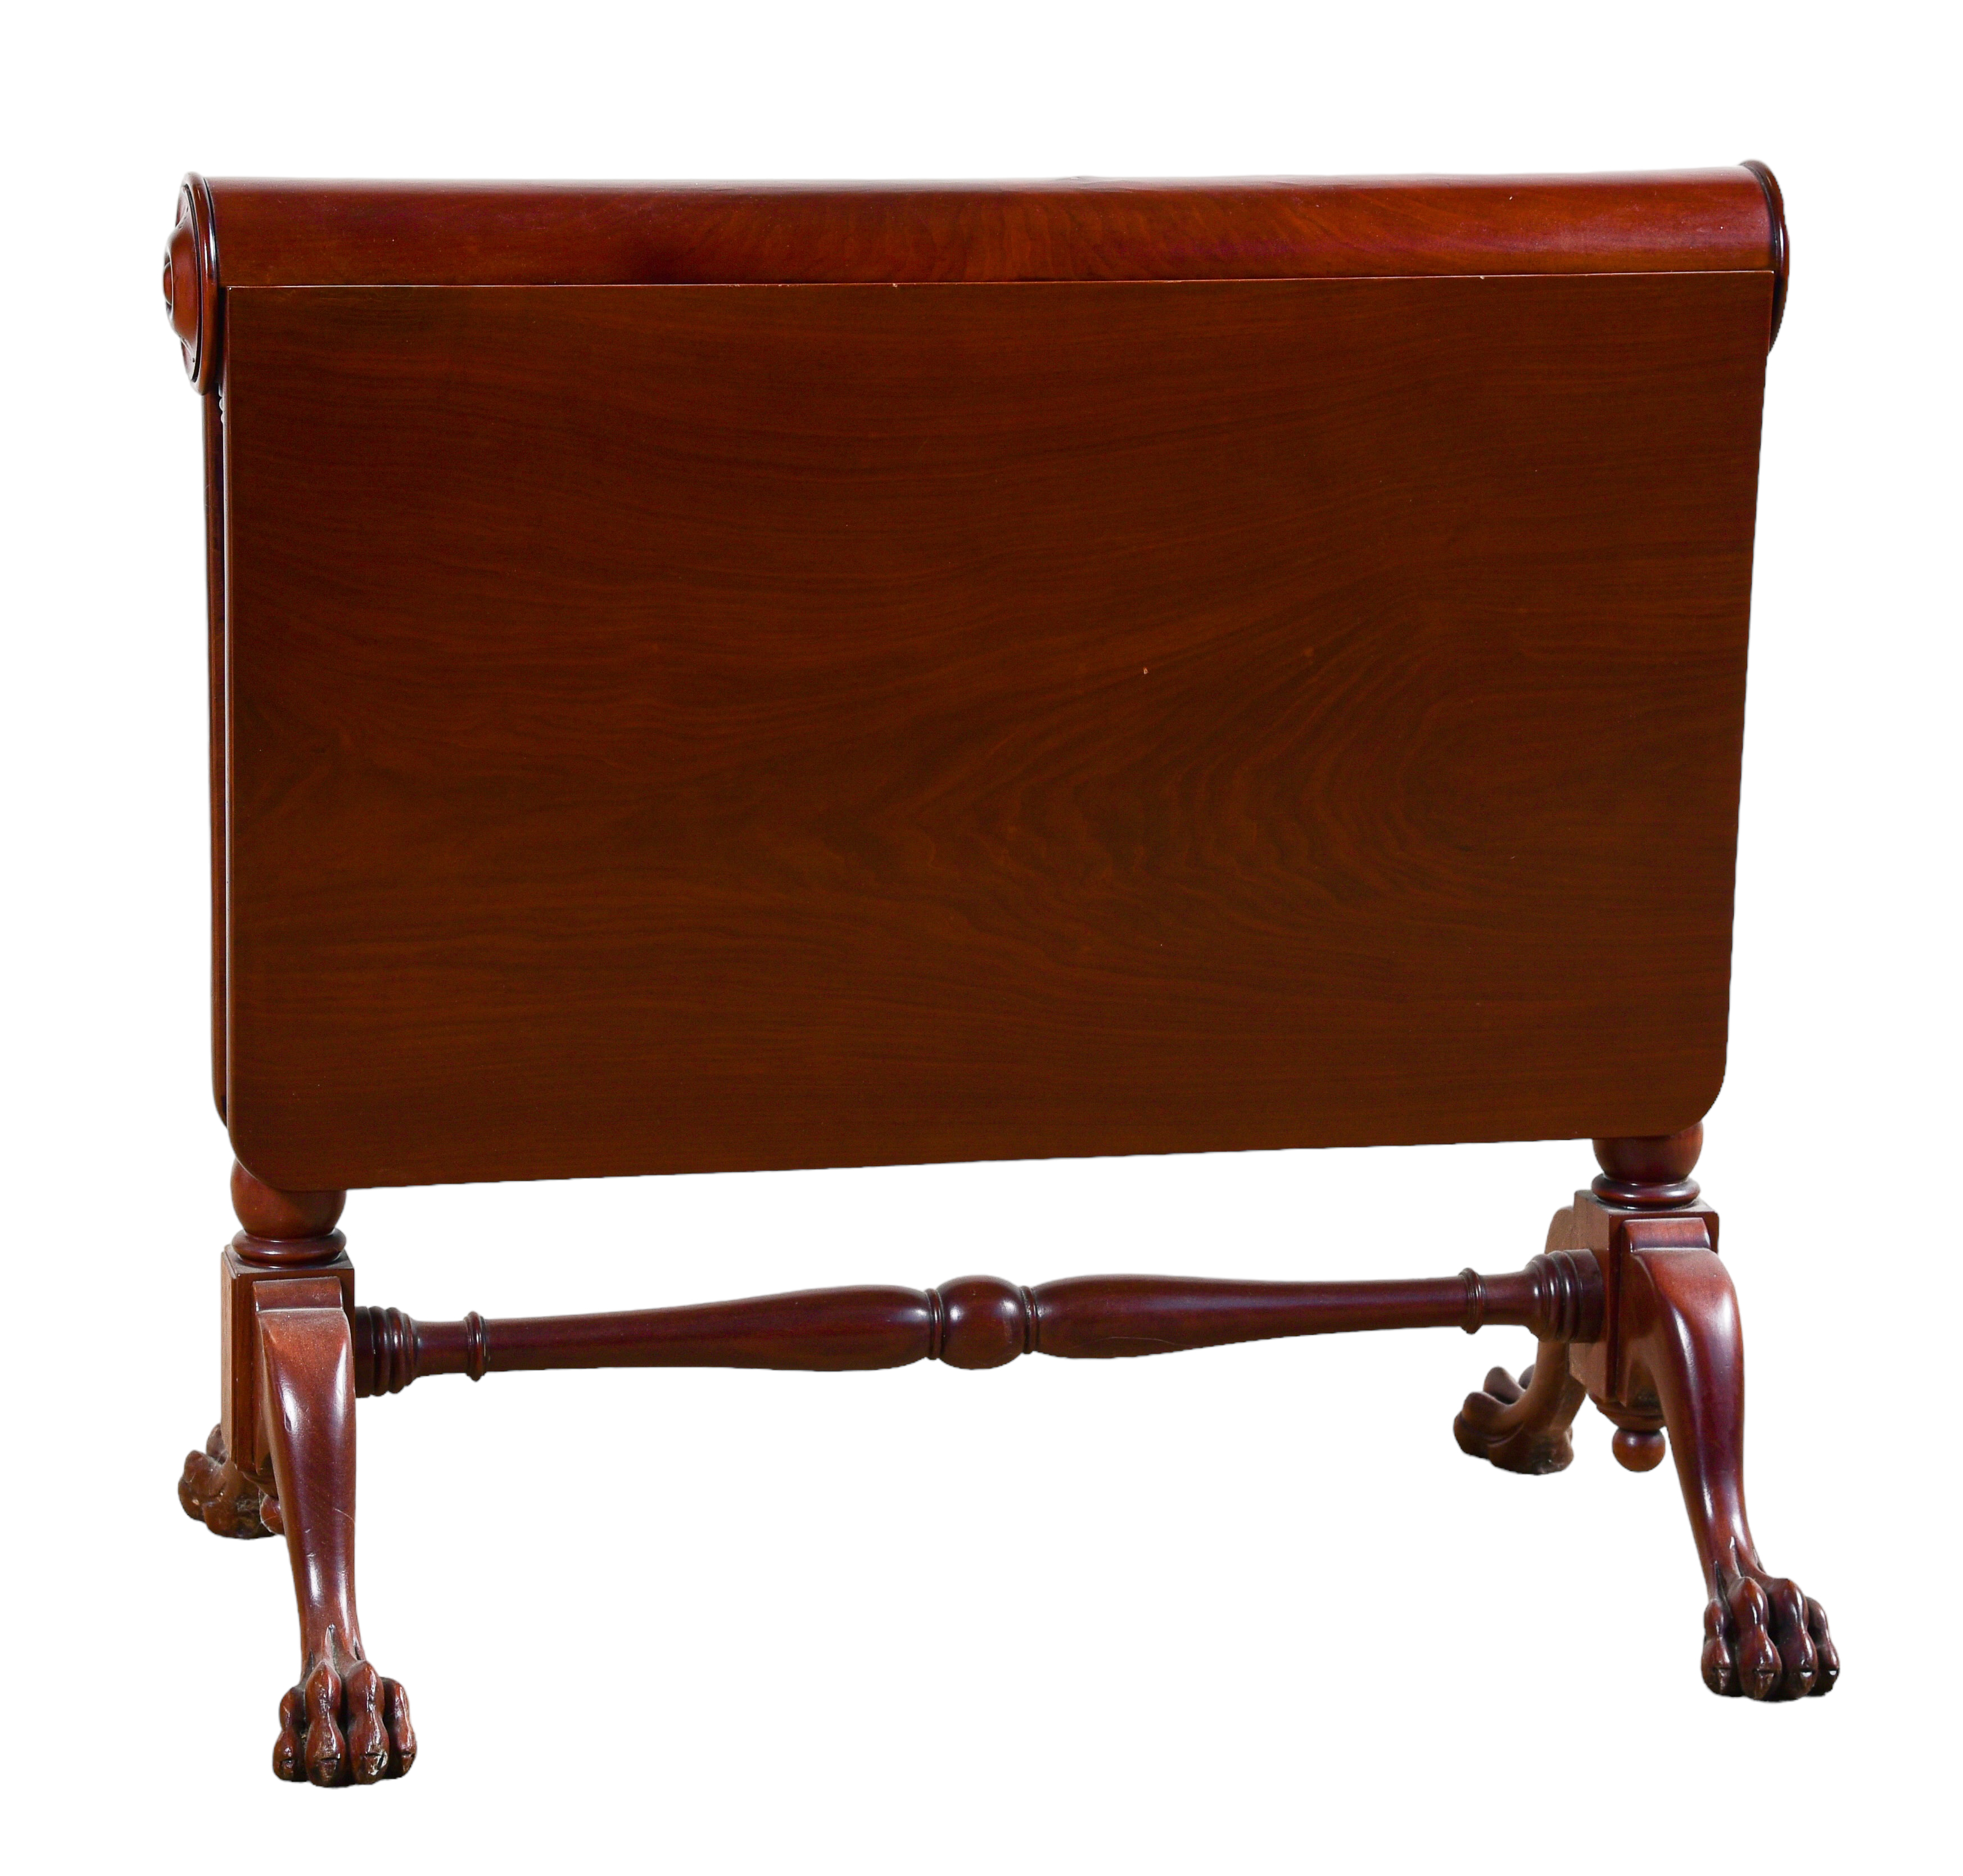 Chippendale style mahogany drop